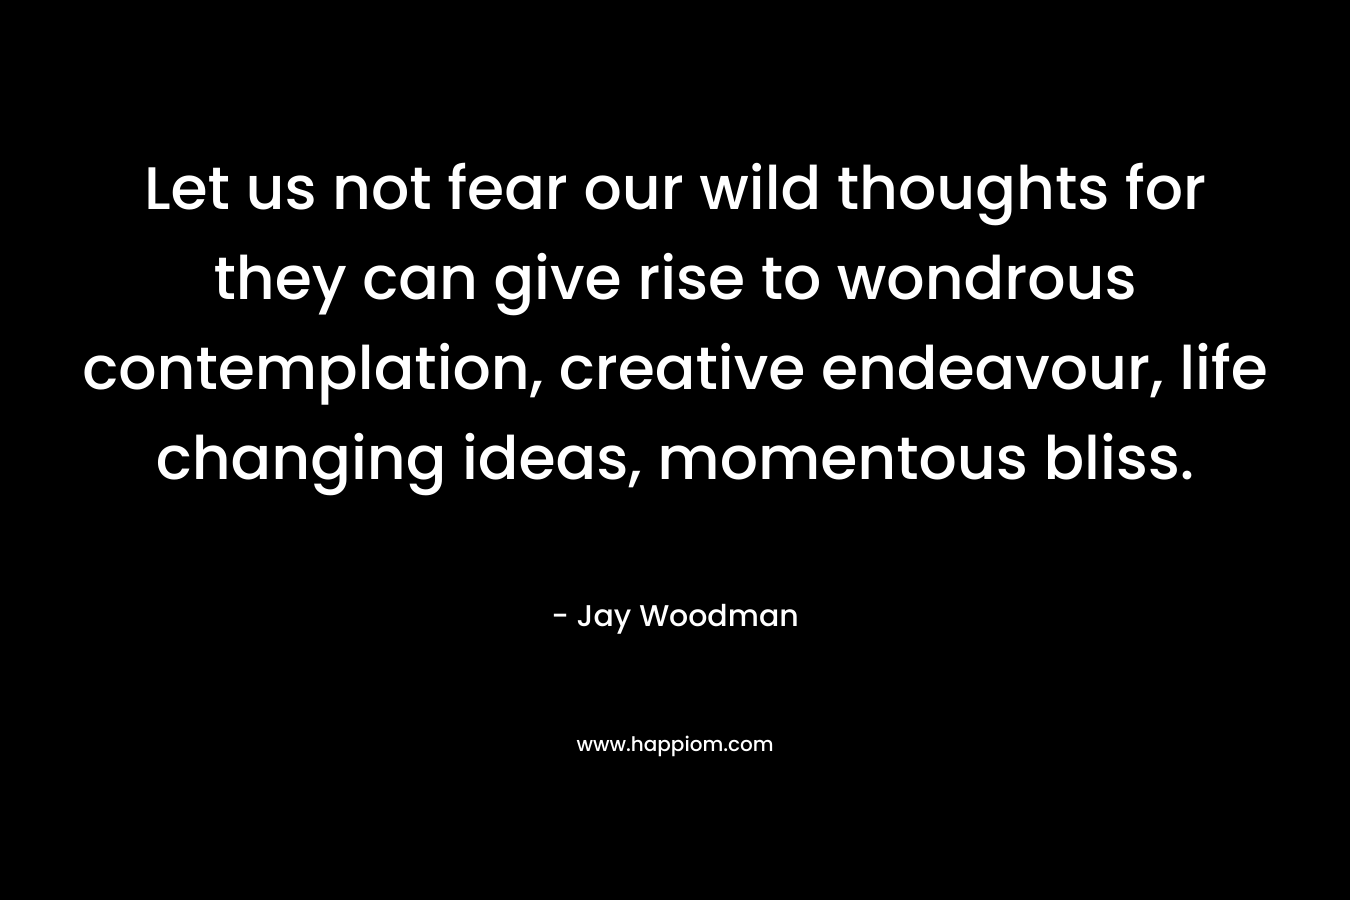 Let us not fear our wild thoughts for they can give rise to wondrous contemplation, creative endeavour, life changing ideas, momentous bliss.